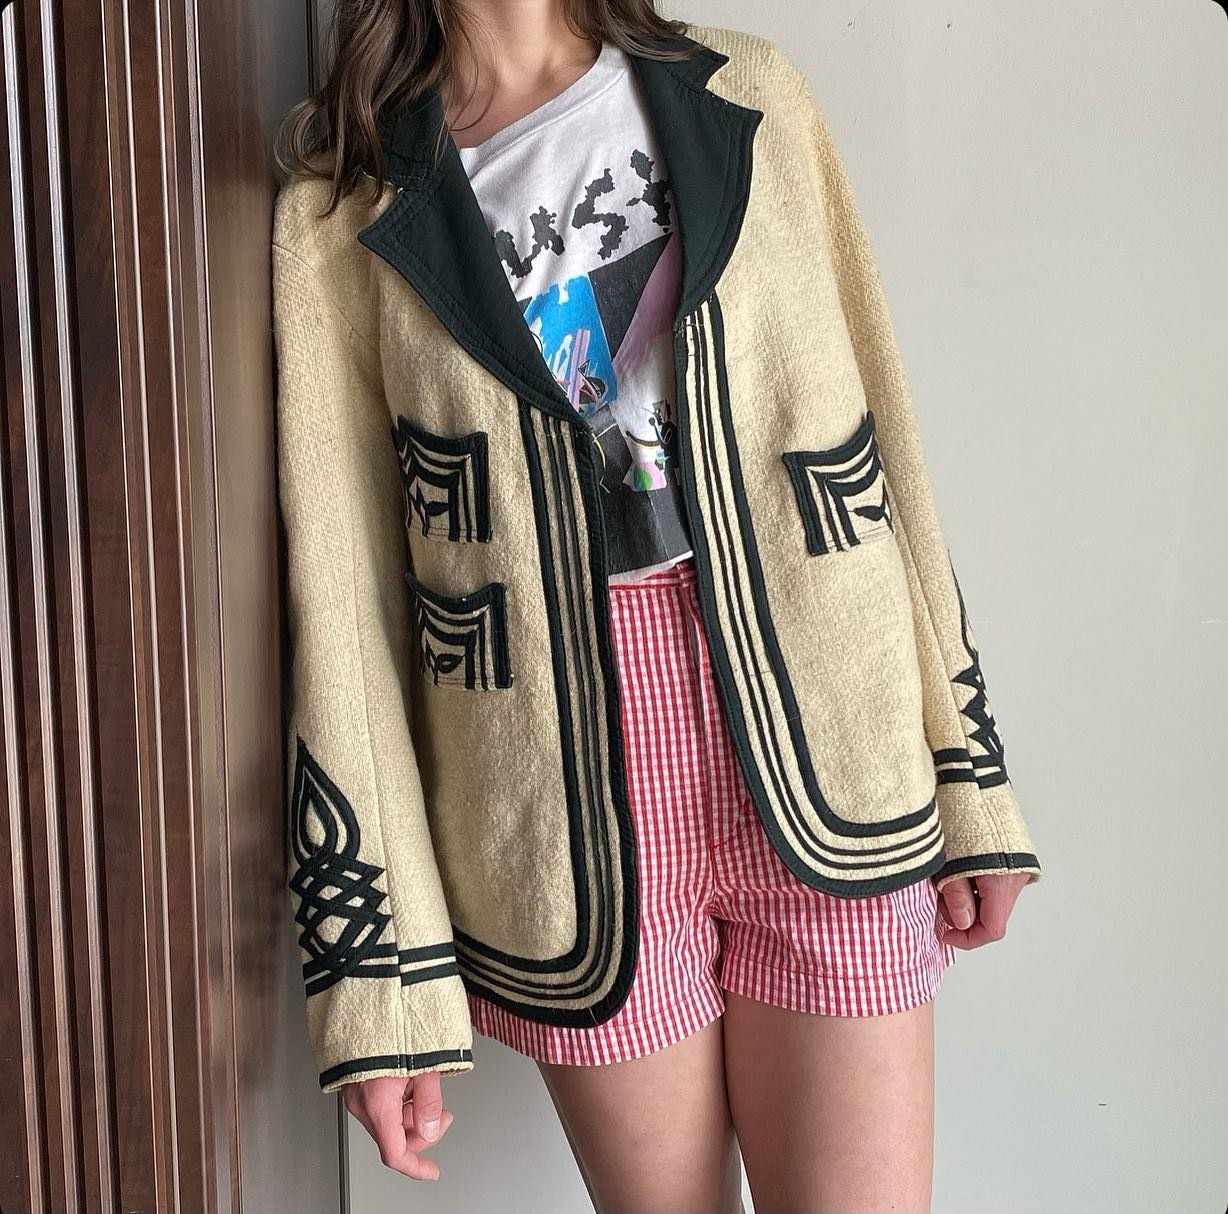 STUNNING vintage hand loomed, hand woven cream wool Guatemalan jacket 🕸️ONLINE NOW🕸️
(Rush tee &amp; gingham shorts in the shop!)
#vintageclothing #milkandice #baltimorevintageexpo